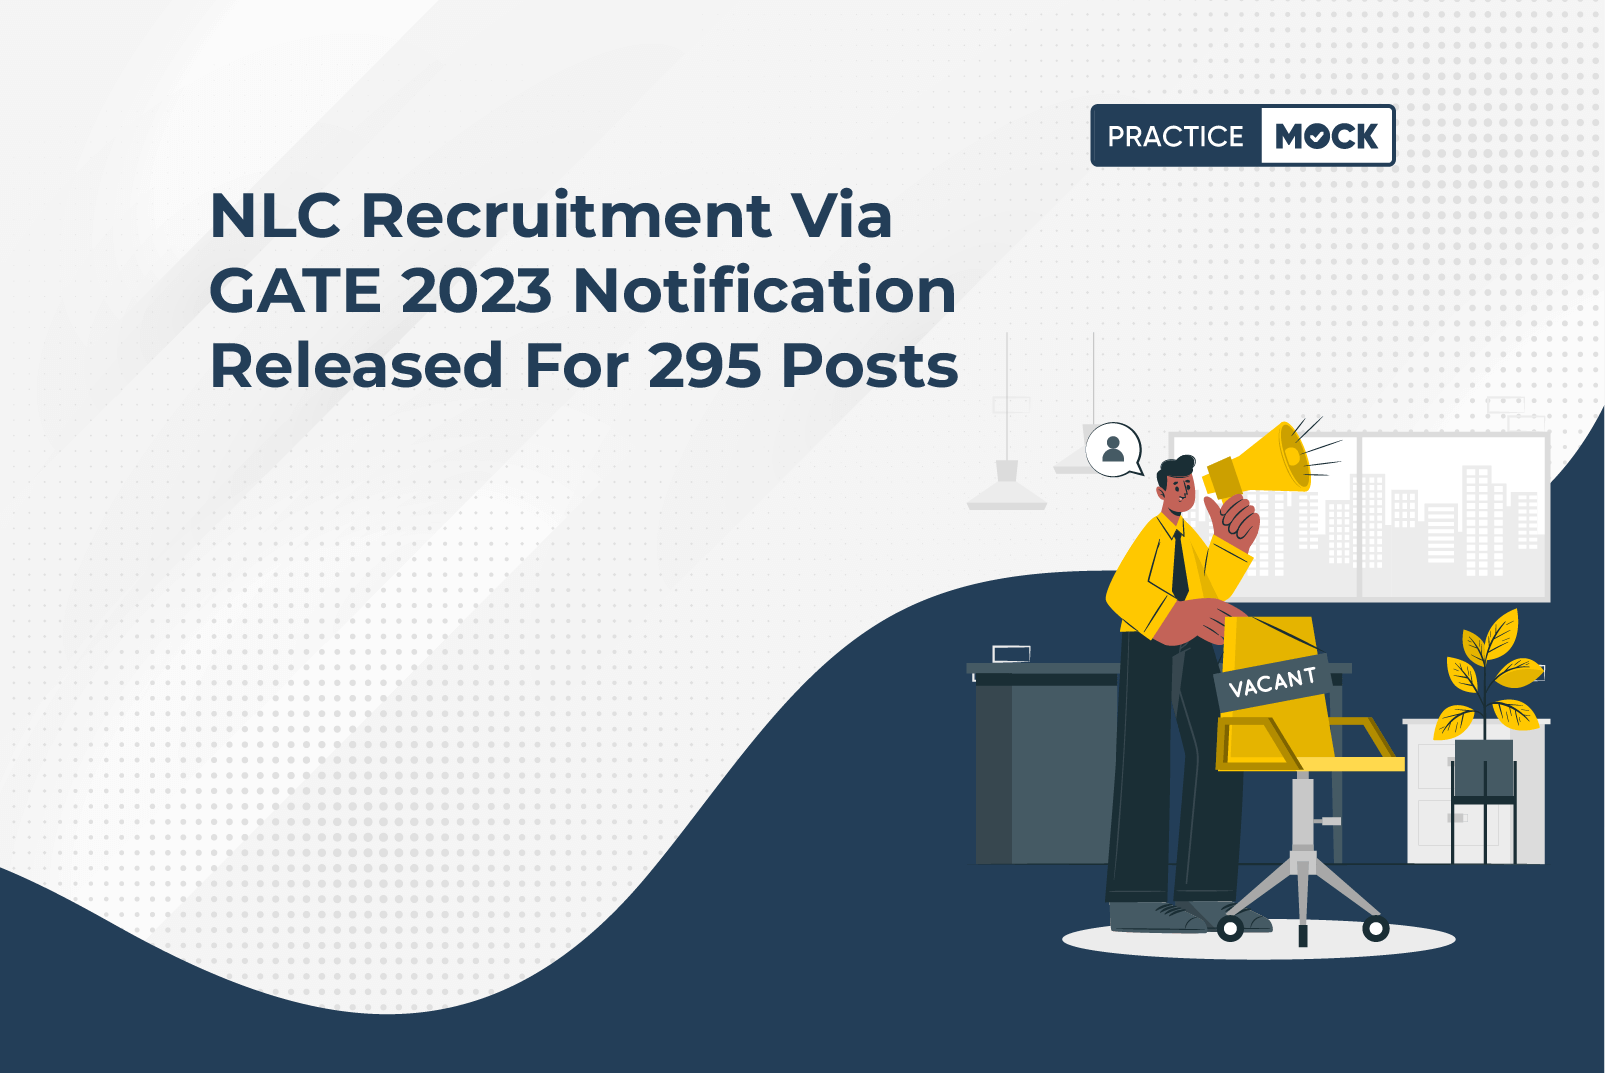 NLC Recruitment Via GATE 2023 Notification Released For 295 Posts